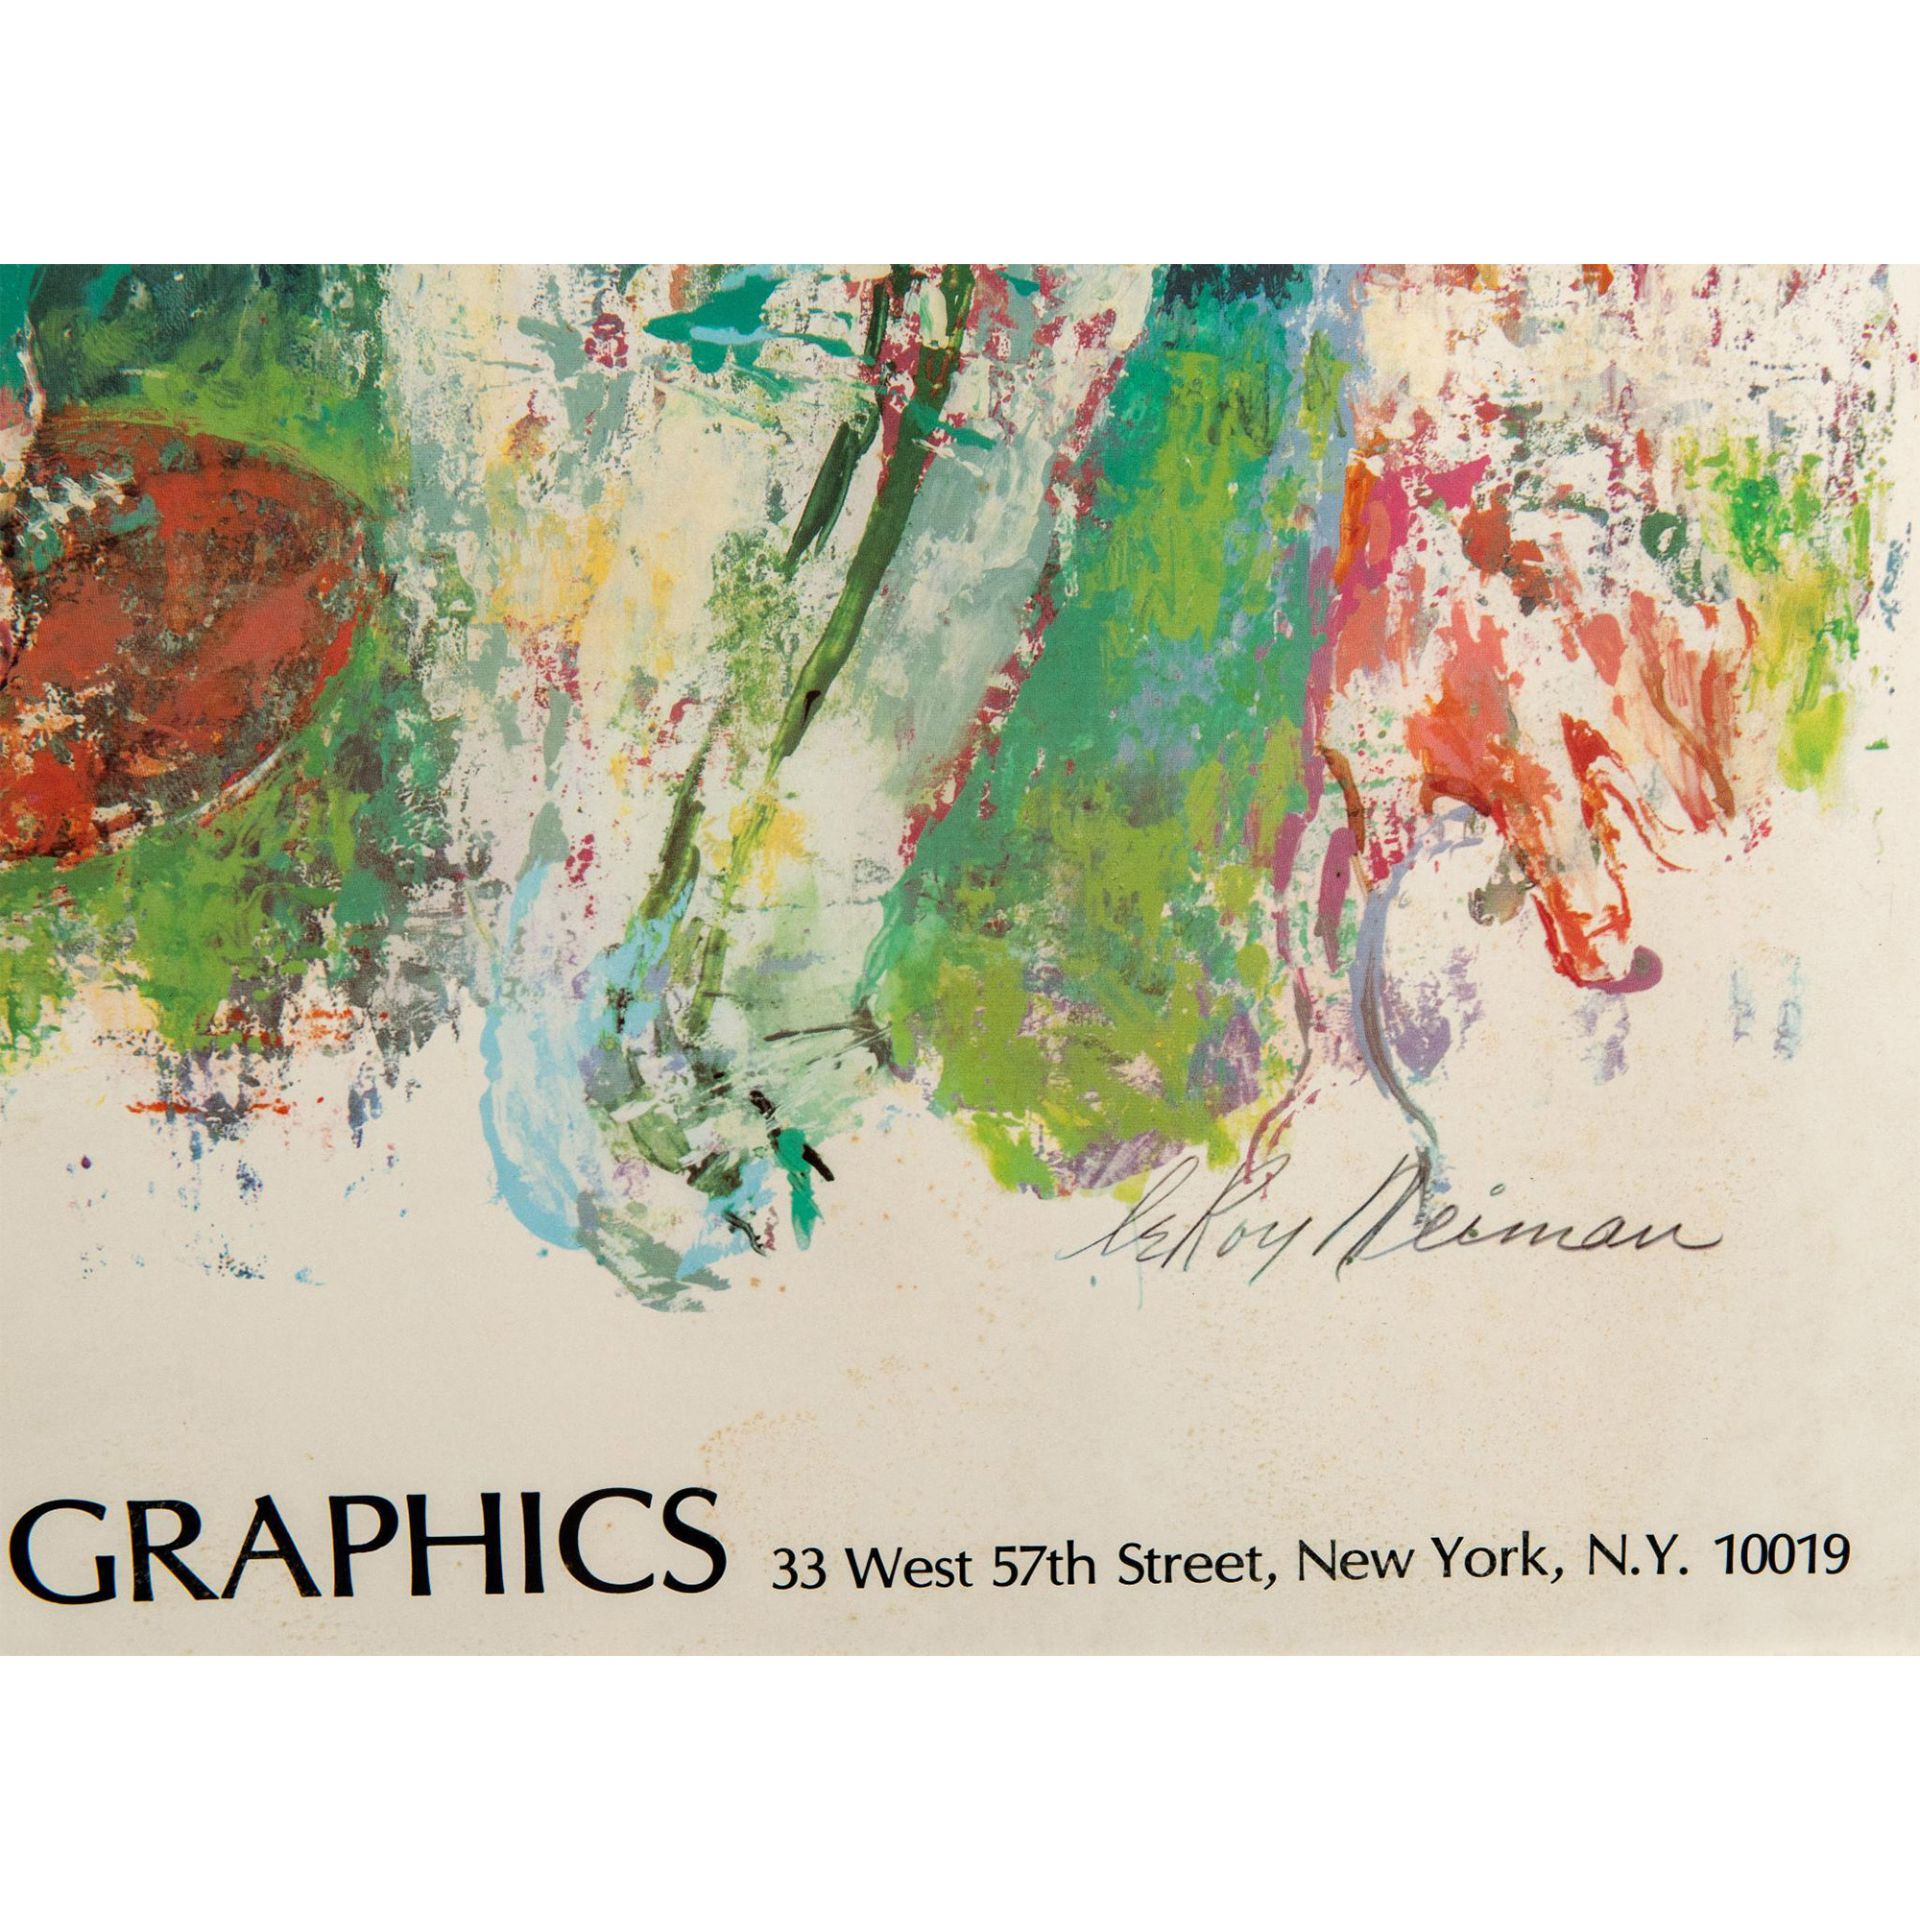 Leroy Neiman, Large Poster on Paper, Miami Superbowl 1969 - Image 4 of 5